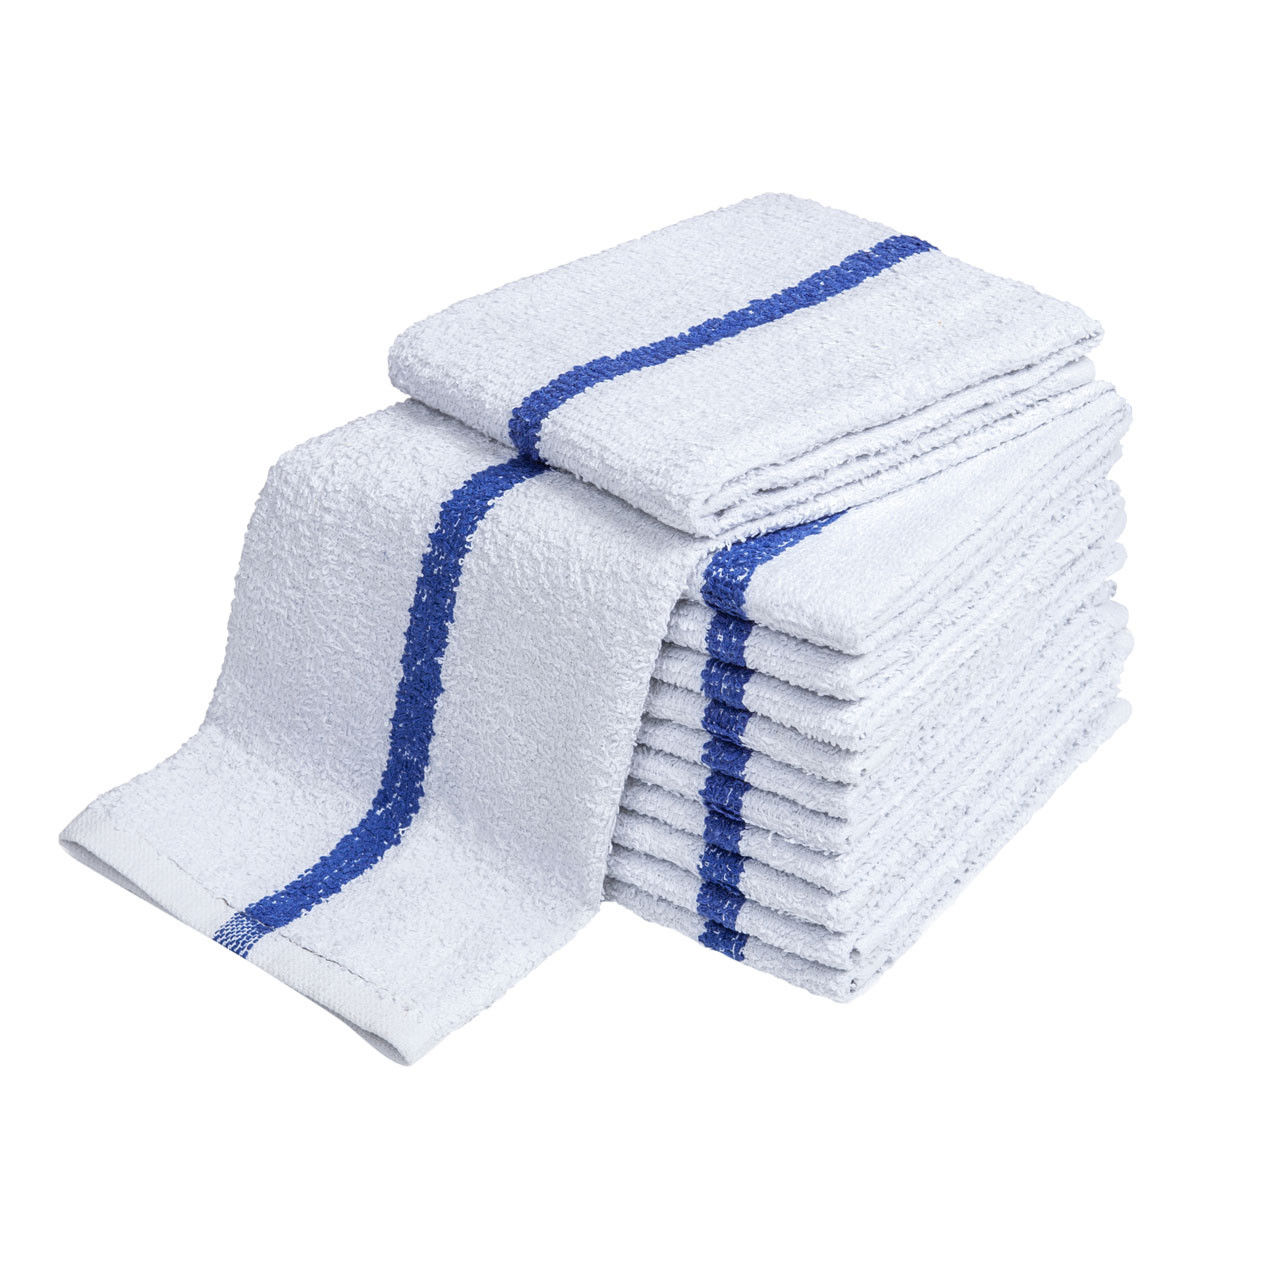 How do the ADI Bar Towels' design enhance the ambiance with their center stripe?